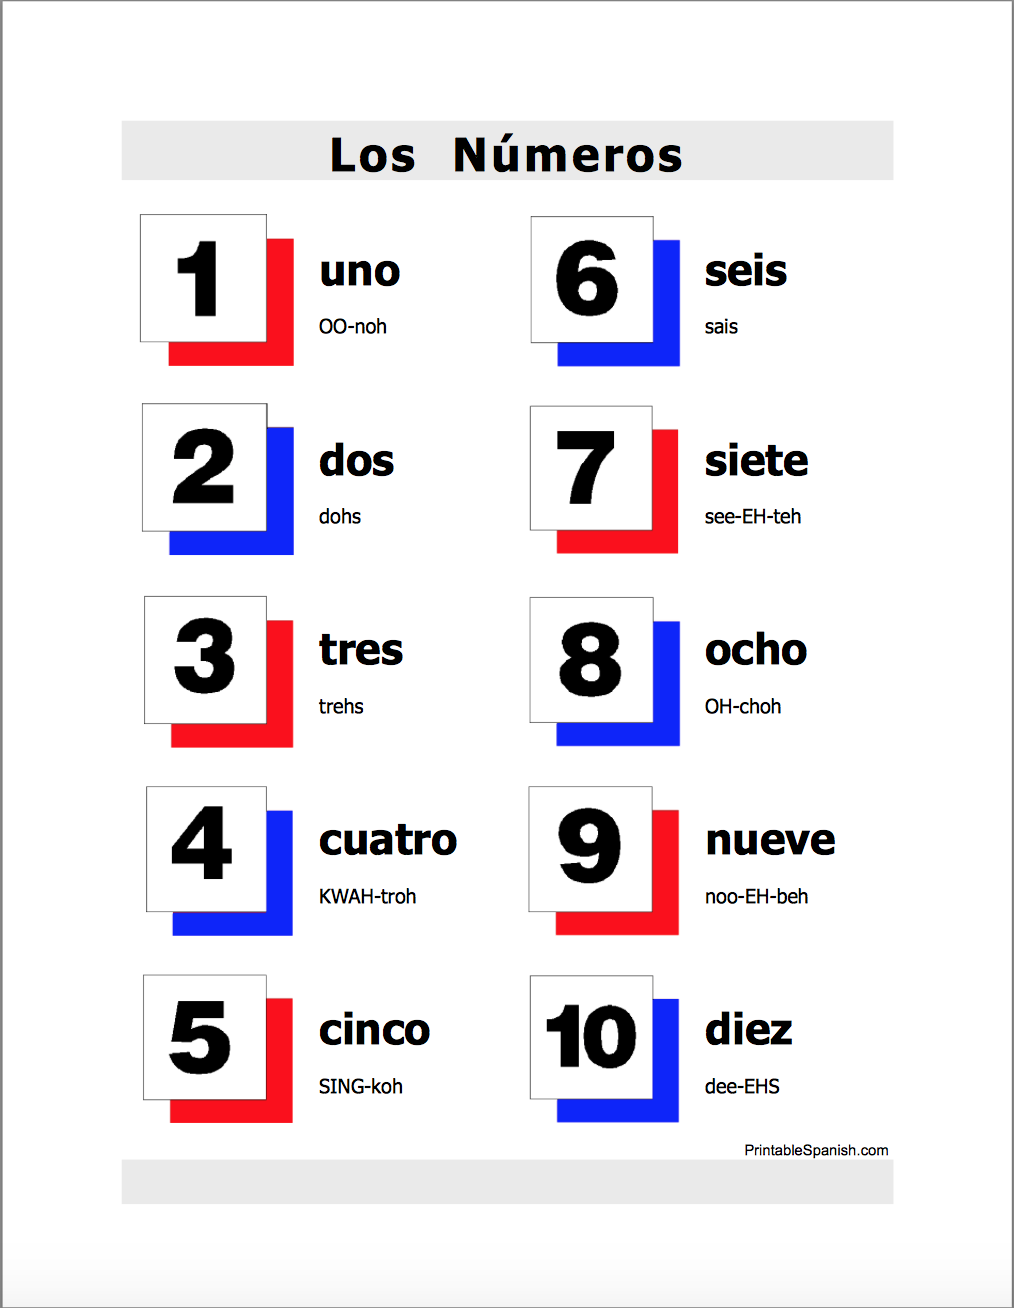 spanish-numbers-1-10-by-mora0711-on-deviantart